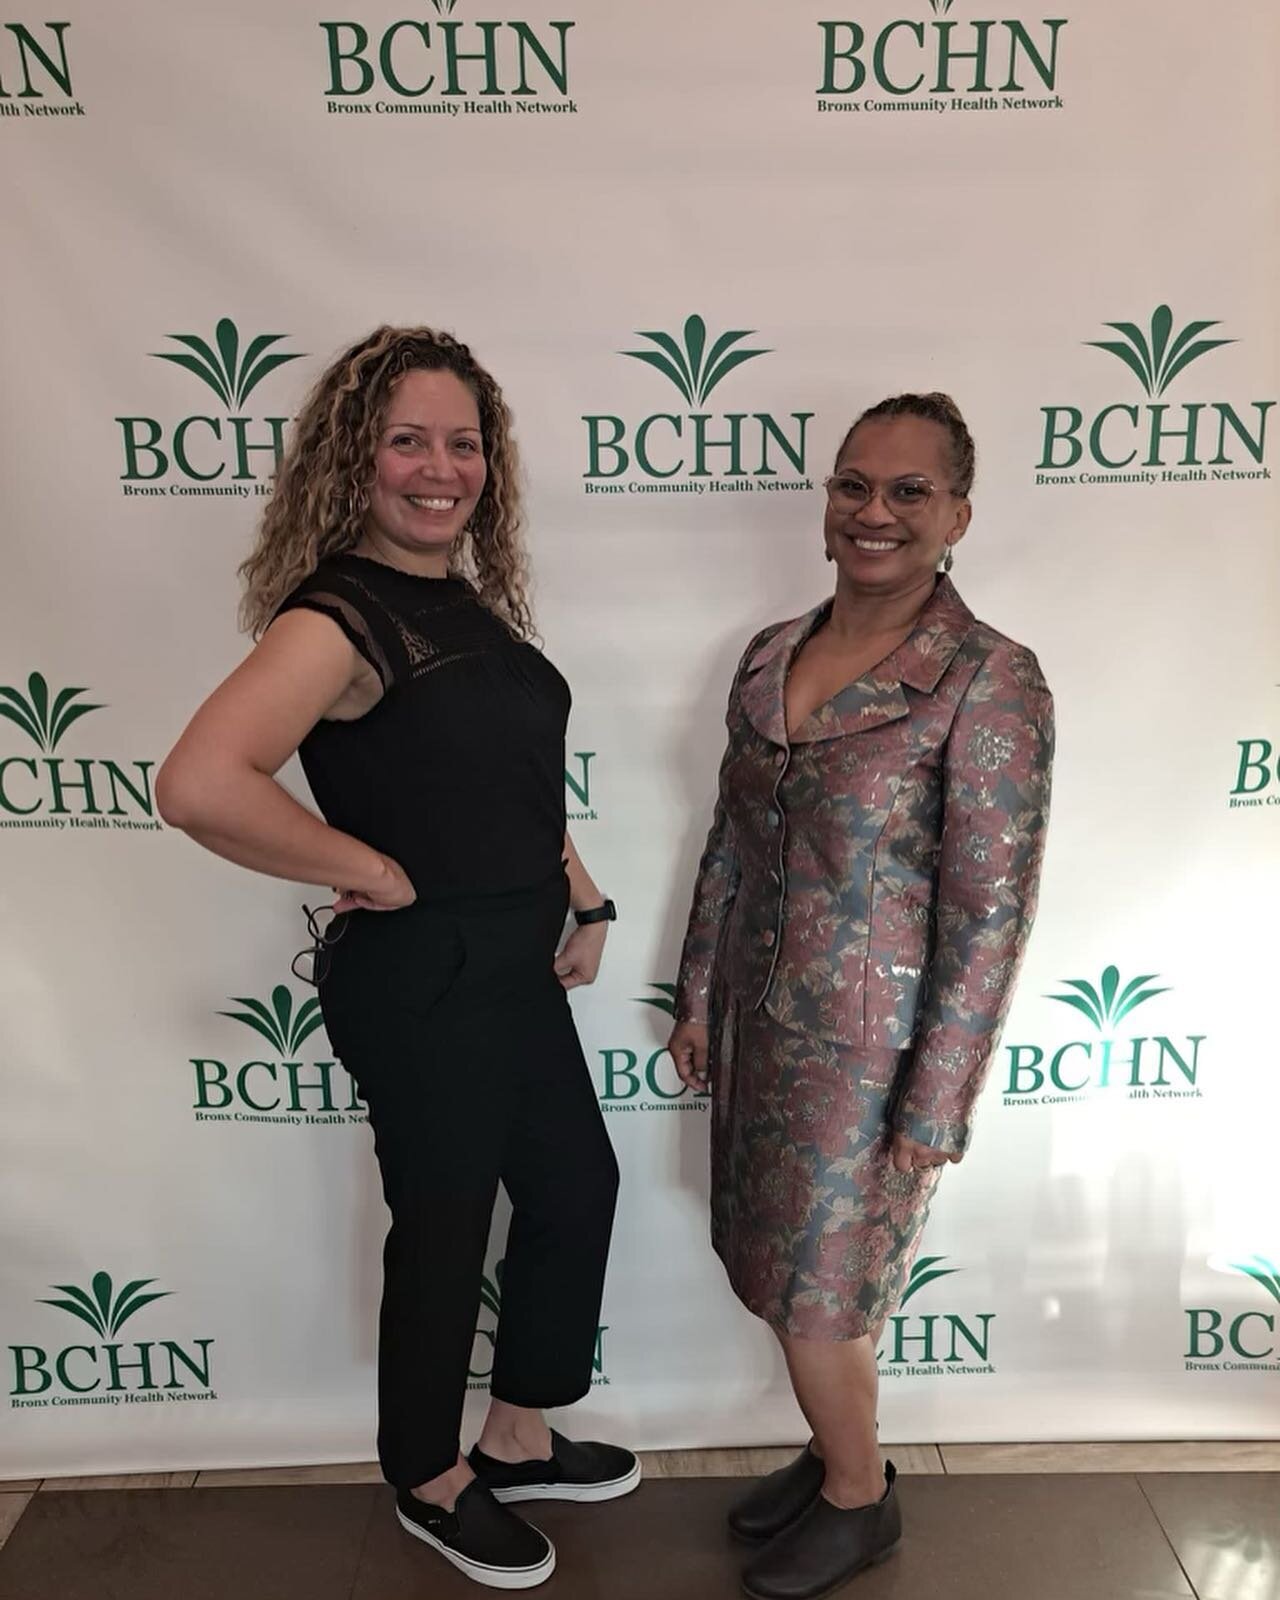 TBHL Administrative Director Shirley P. Leyro and Community Health Educator Eleaquina Fabian are at the annual meeting for the Bronx Community Health Network. 

@bchnhealth is committed to improving the health and well-being of our Bronx community. T